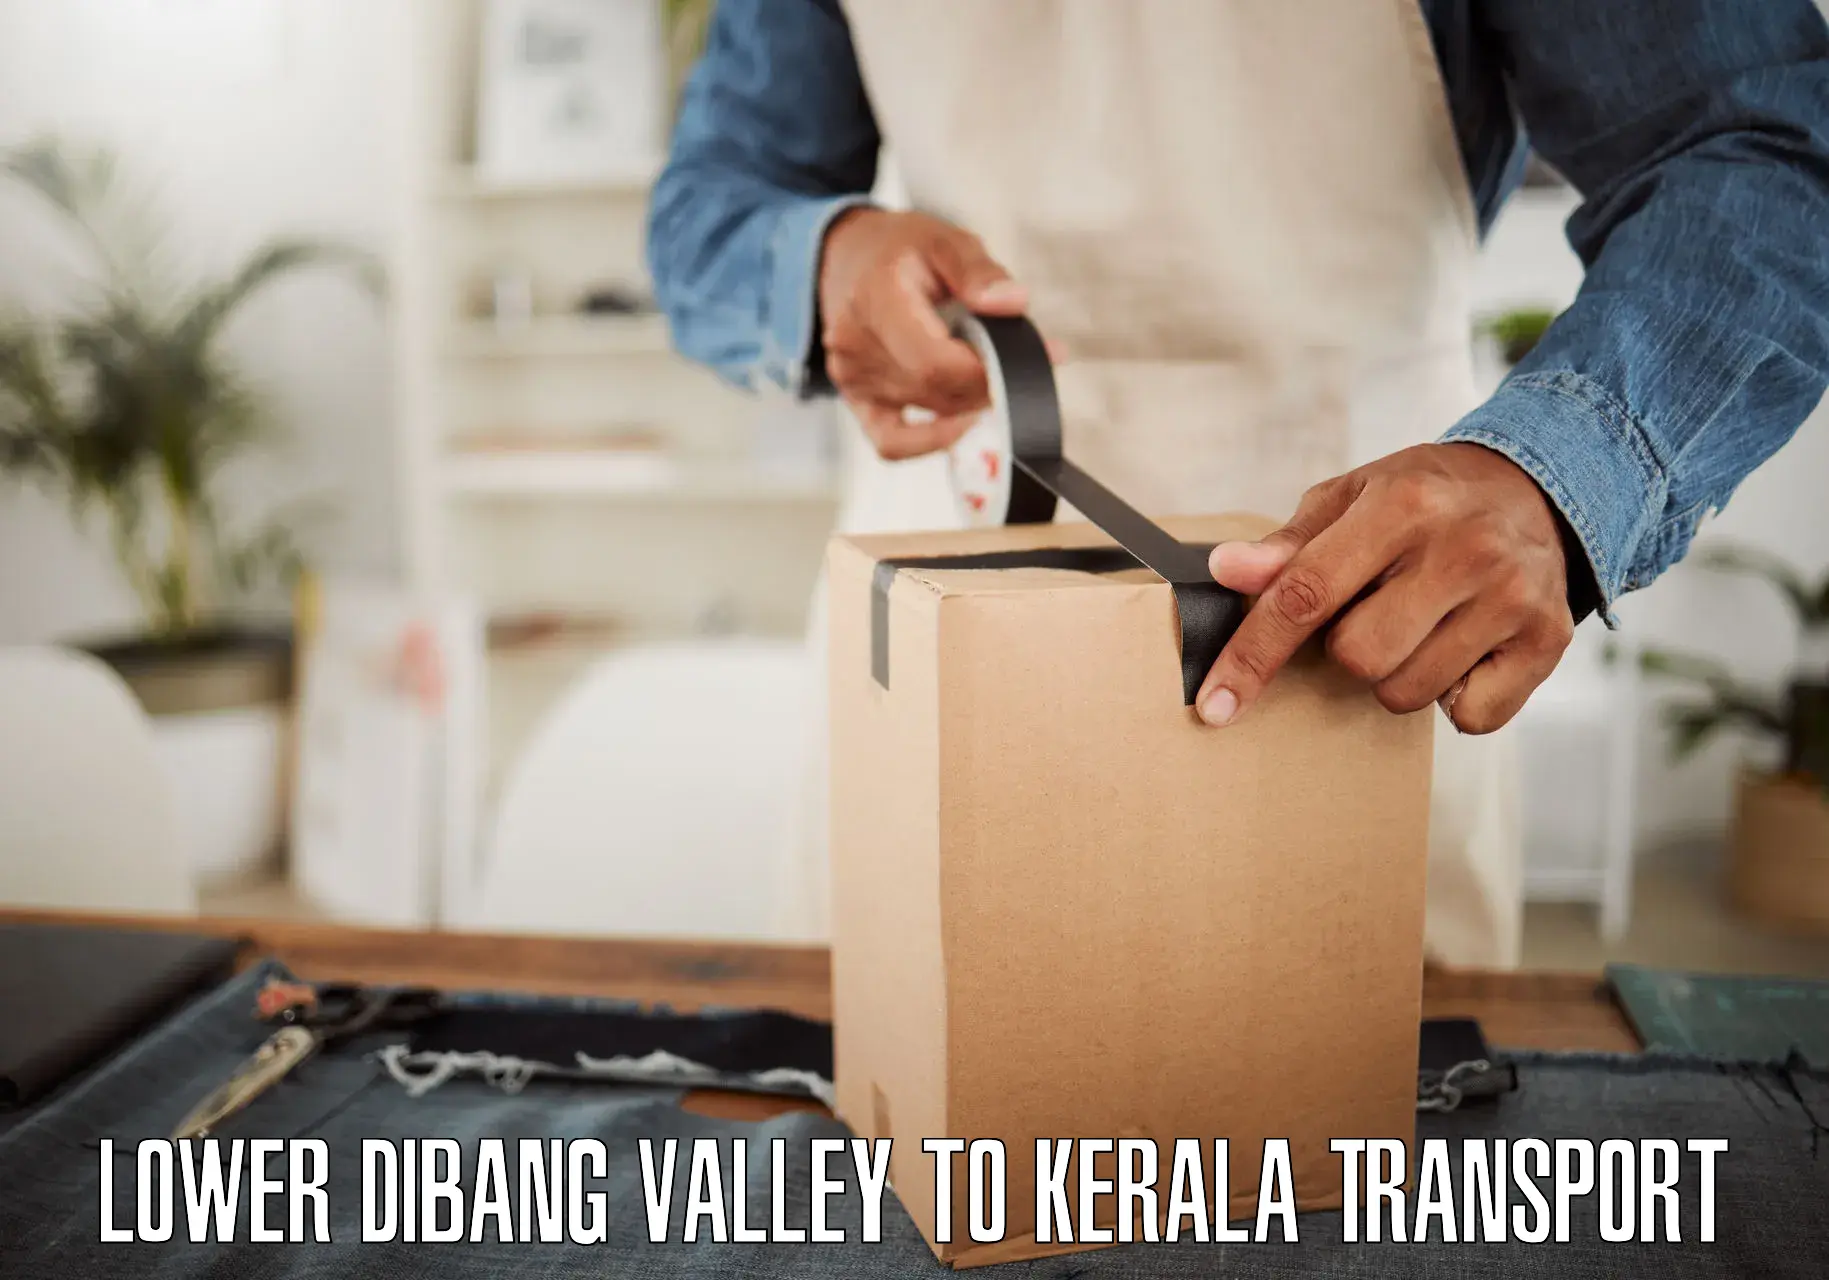 Daily parcel service transport Lower Dibang Valley to Nedumkandam